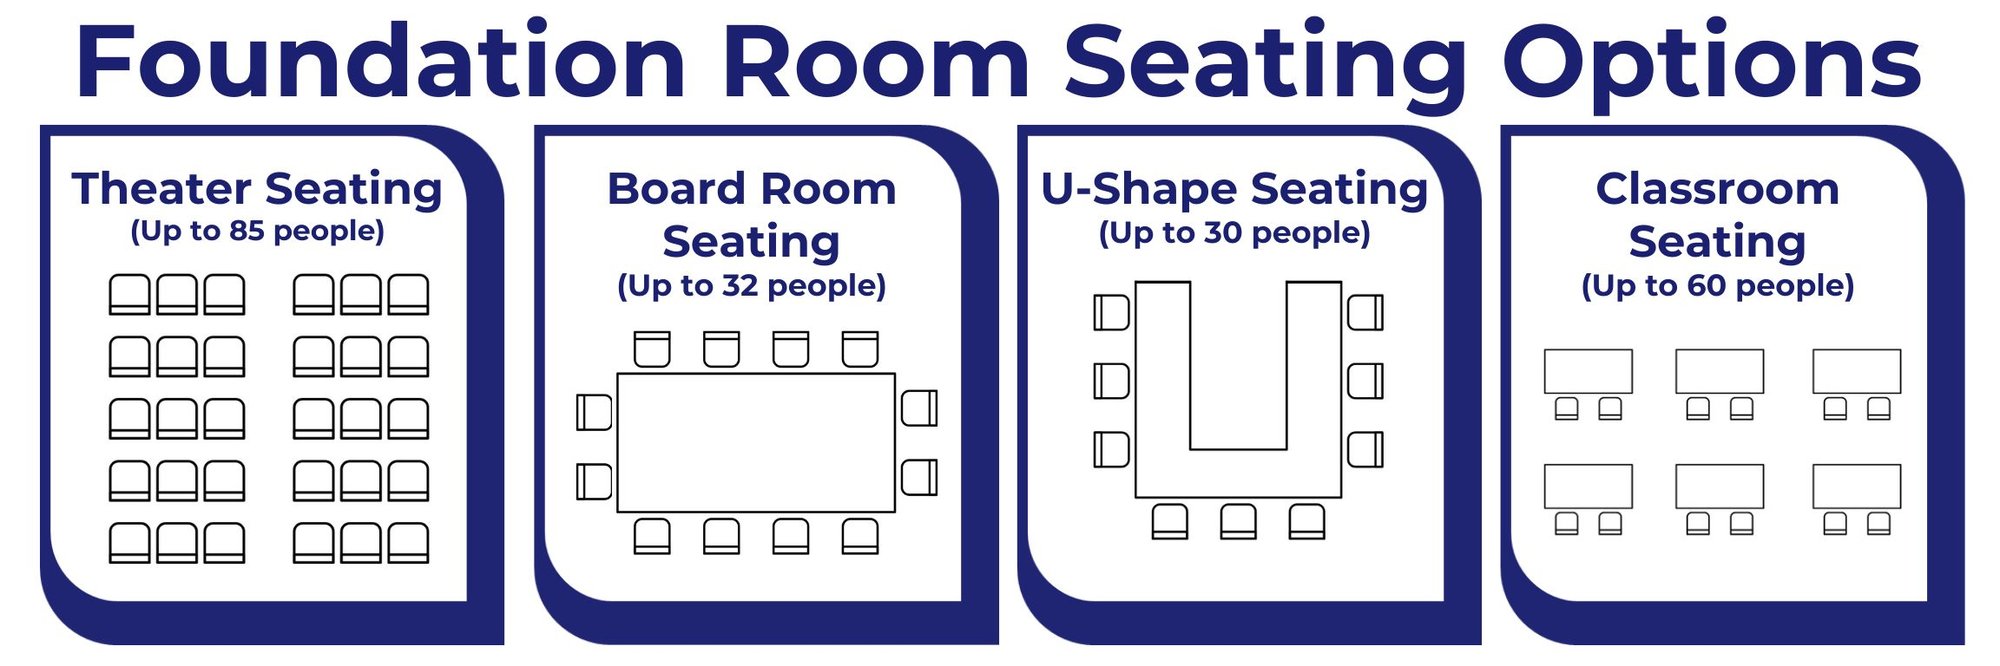 Foundation Room Seating - all options - no contact -1